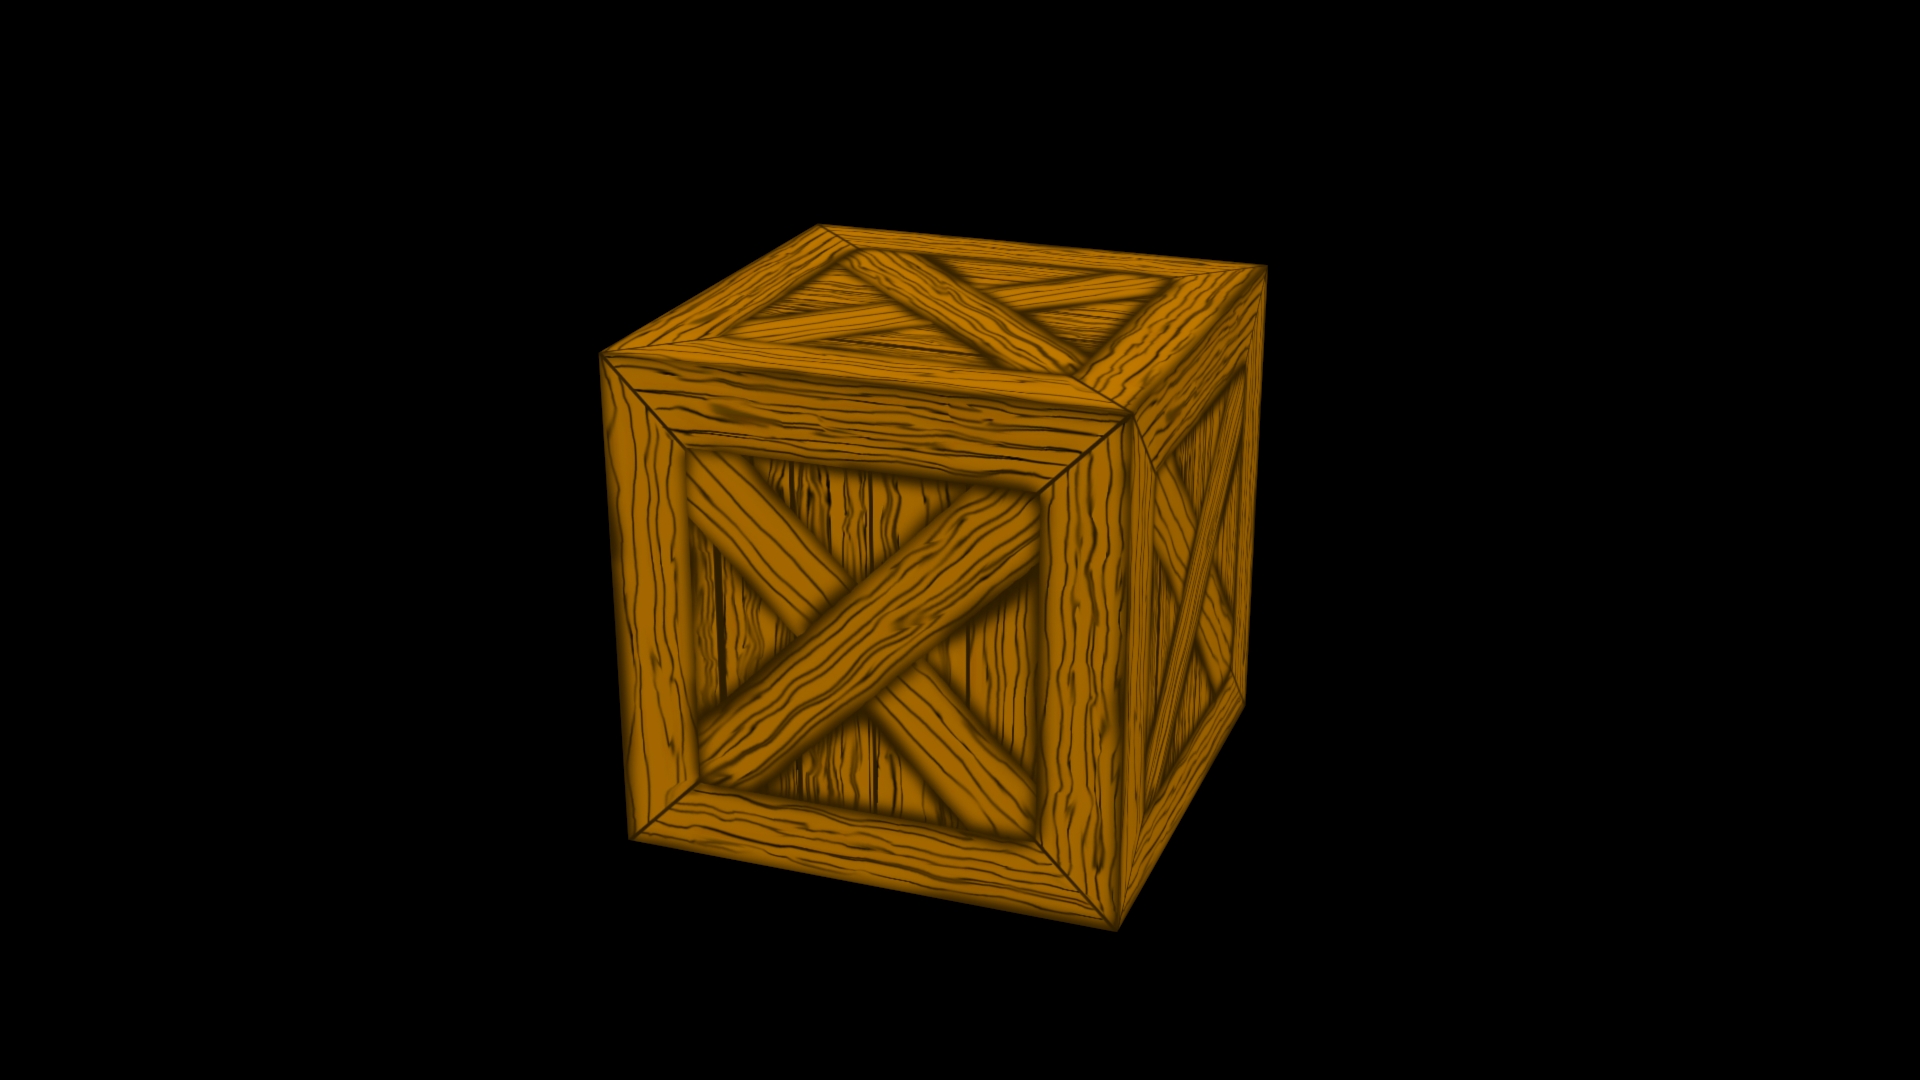 3D rendered wooden crate.